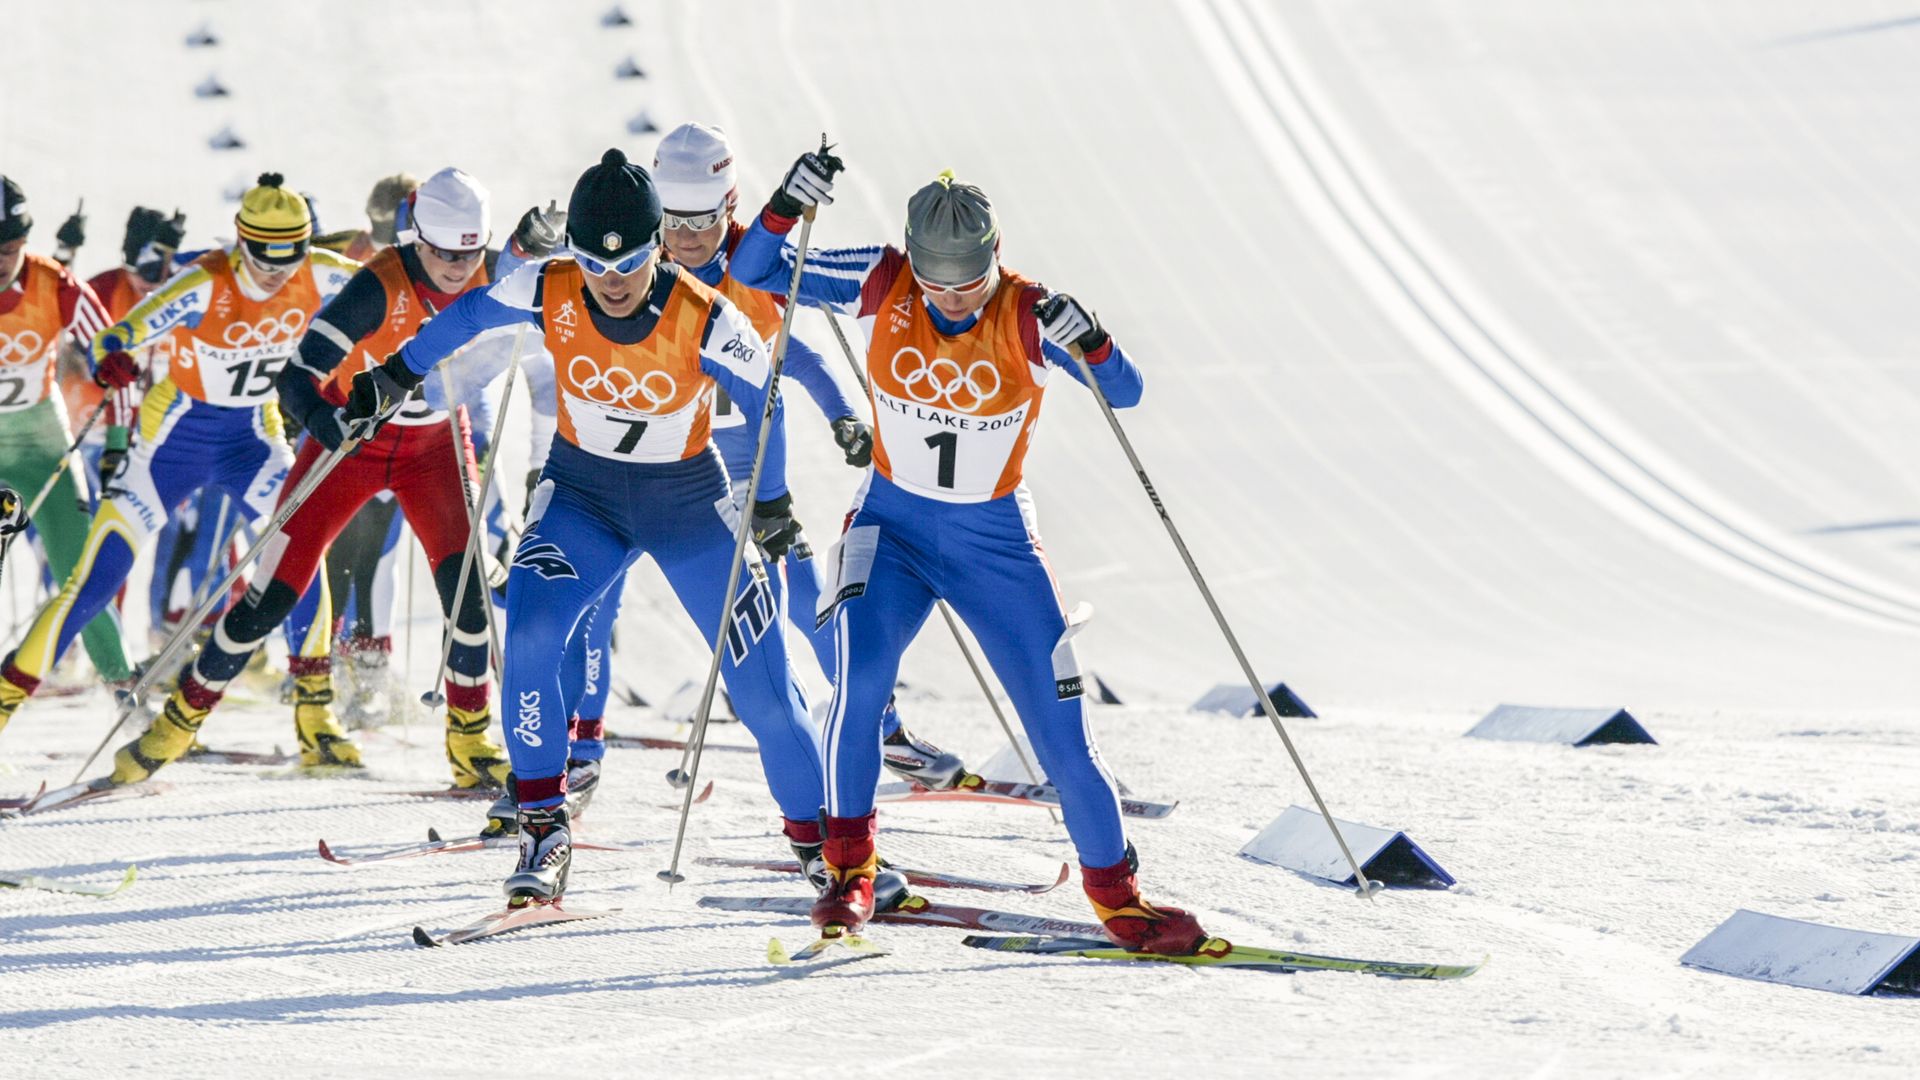 Cross country skiers compete at the Olympics.